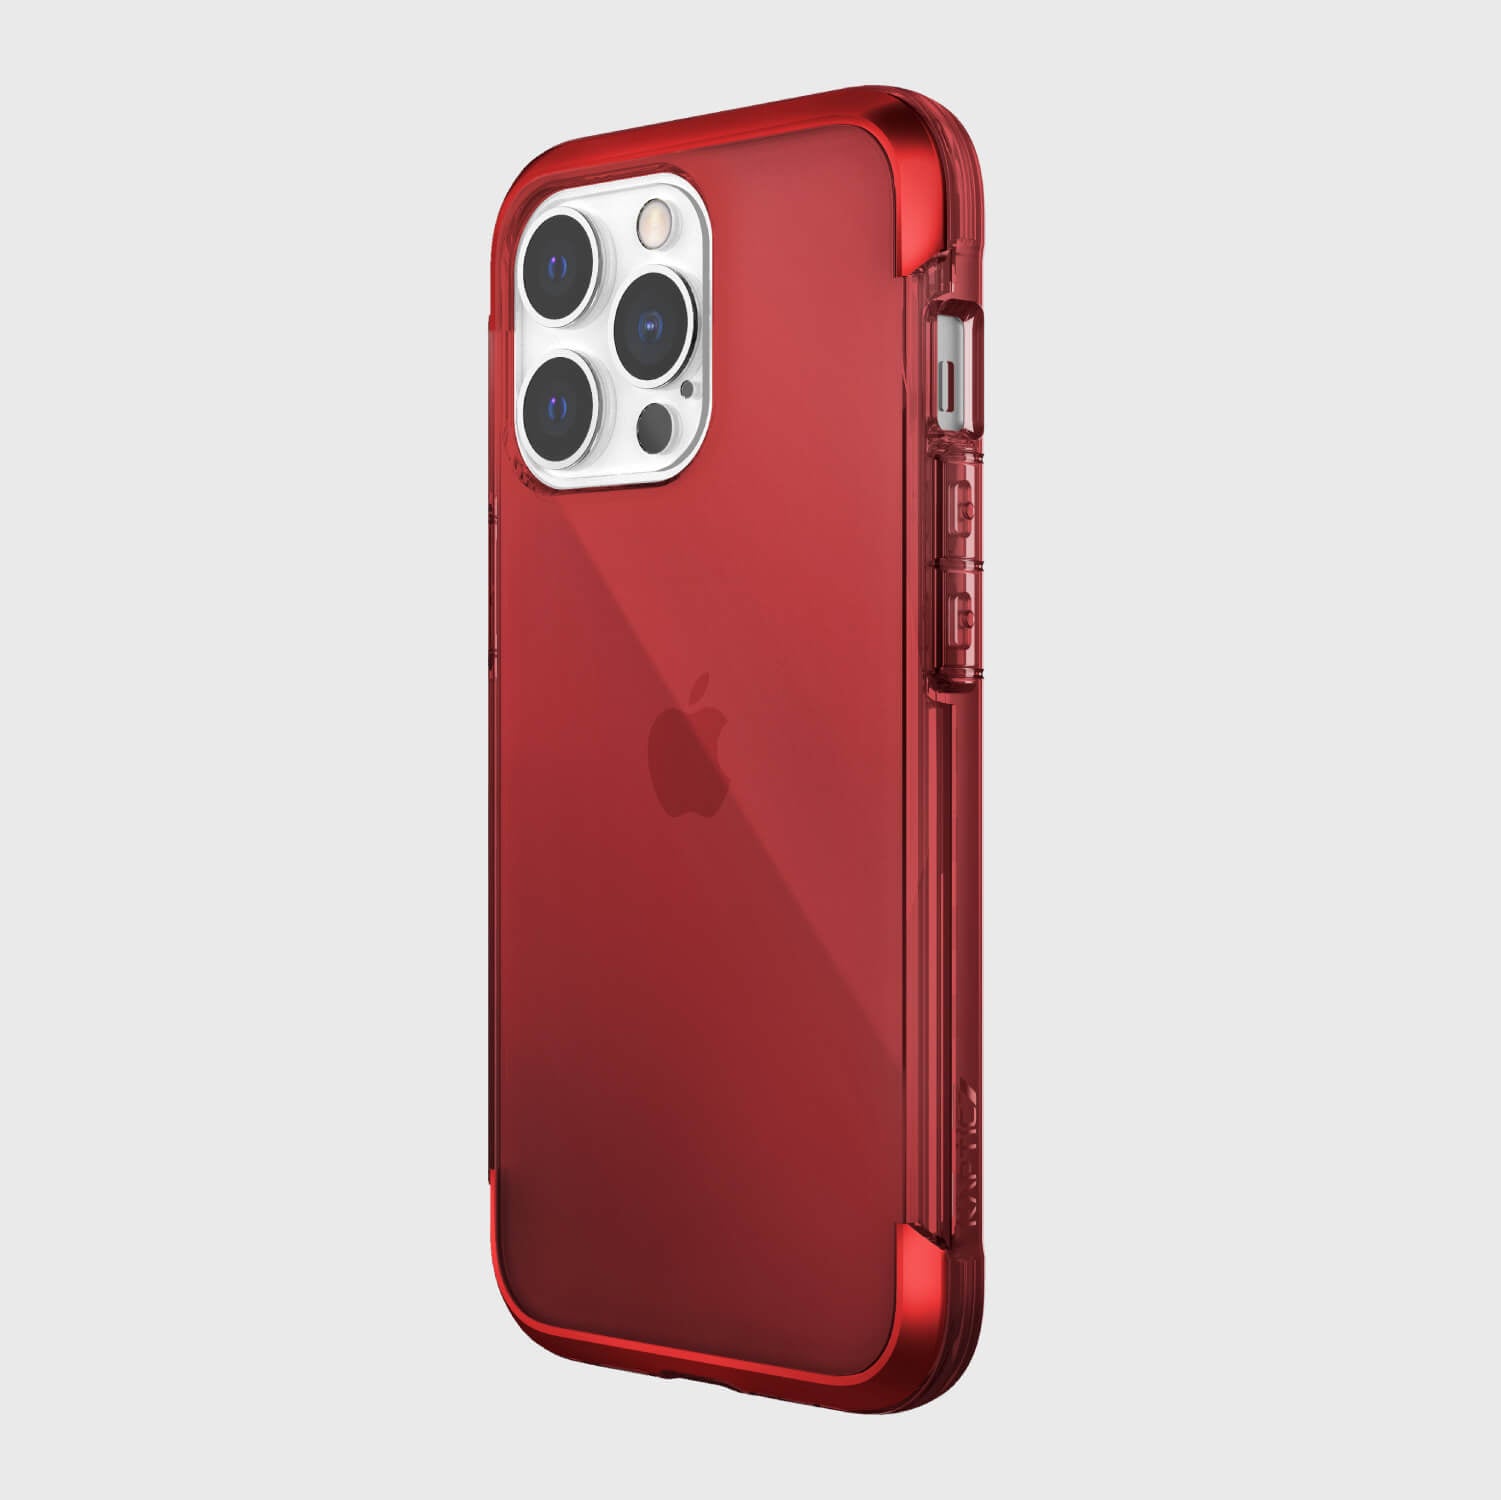 A red Raptic iPhone 13 Pro Max Case - AIR with multiple cameras and 13-foot drop protection.